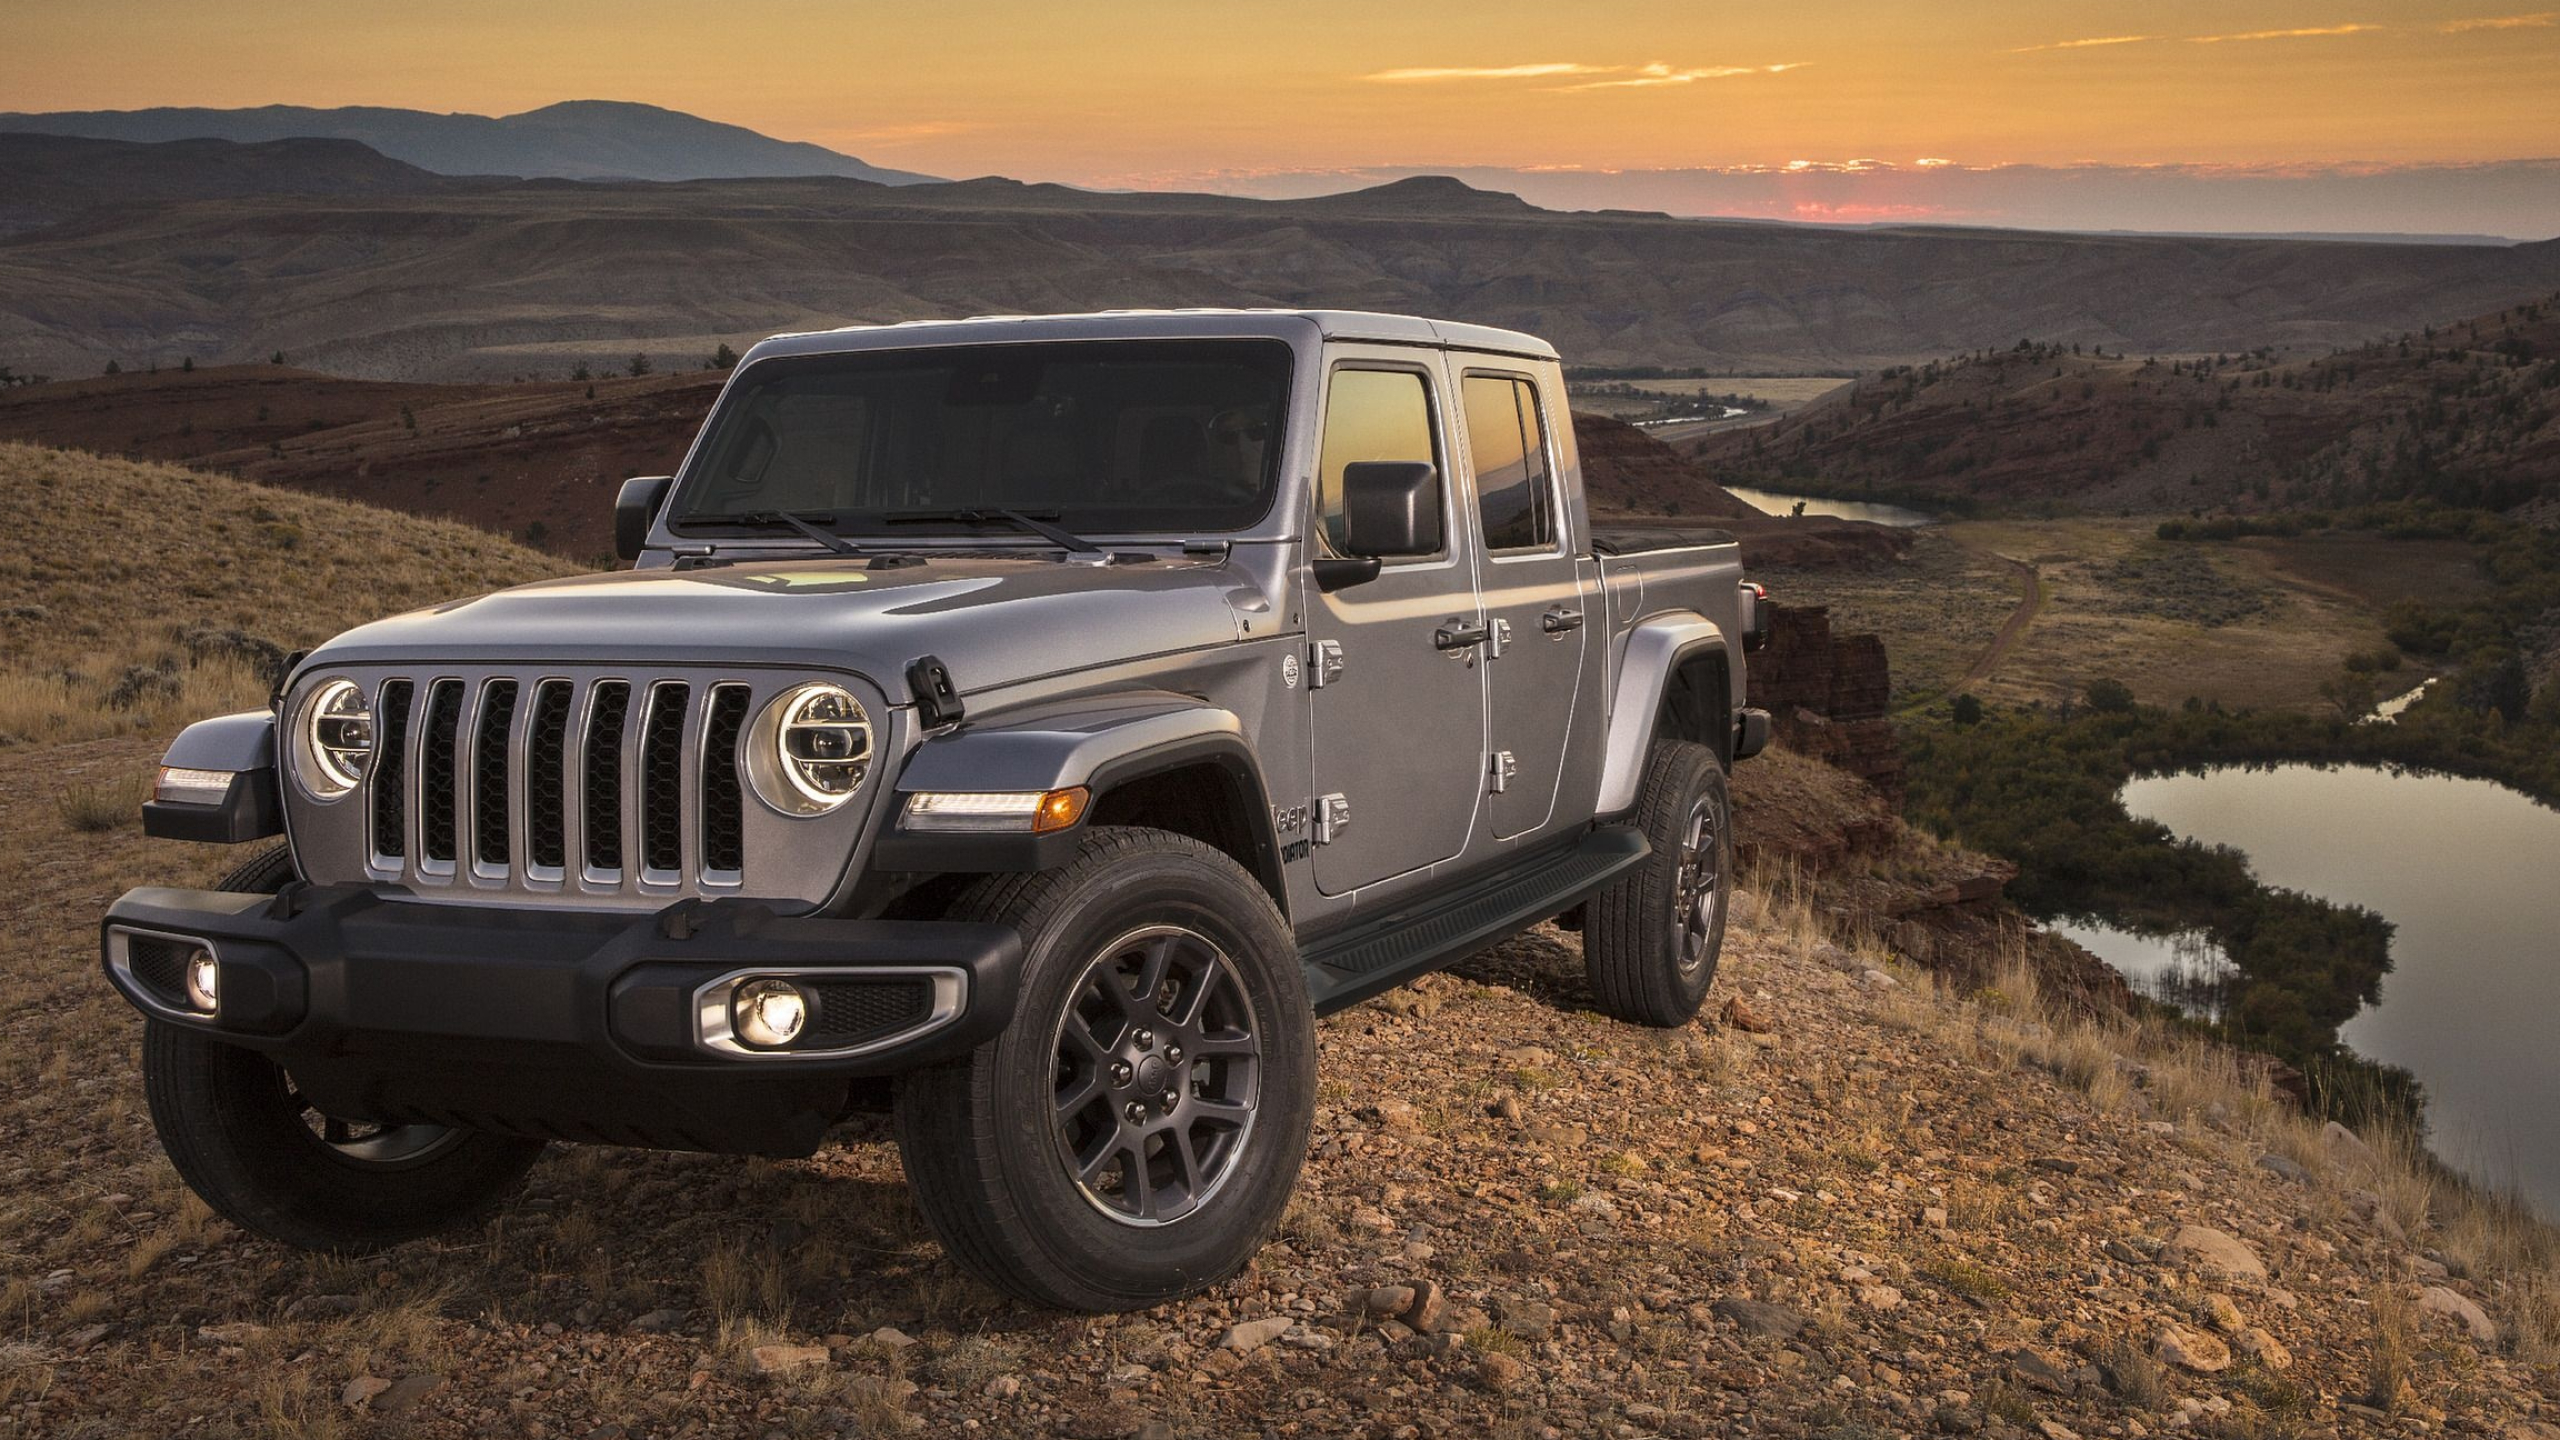 Jeep Gladiator, Powerful and rugged, Off-road adventure, Versatile and capable, 2560x1440 HD Desktop